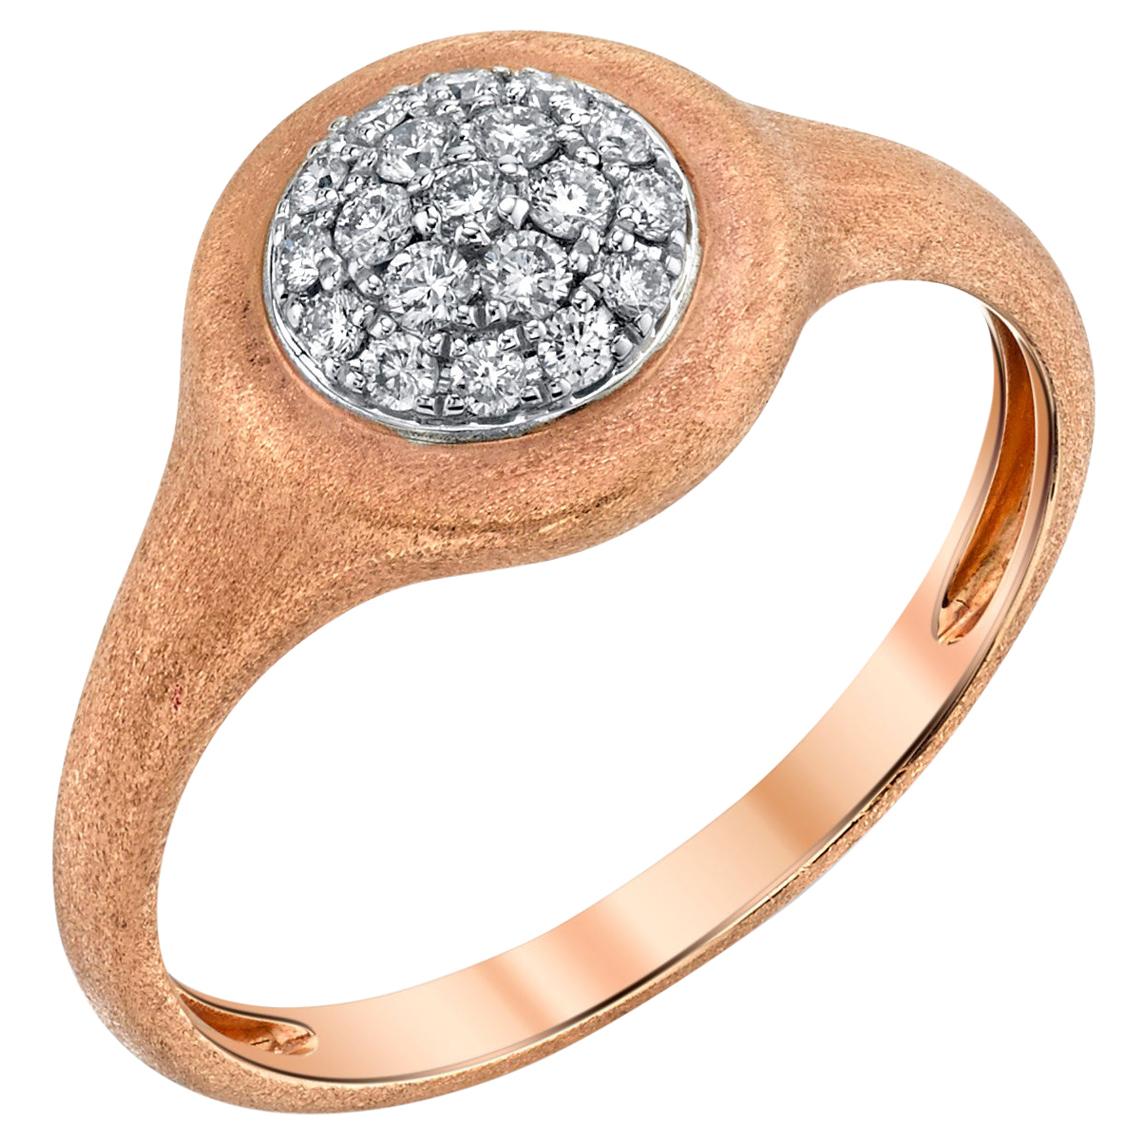 Diamond Pave Cocktail Ring in White and Brushed Rose Gold, .22 Carat Total For Sale